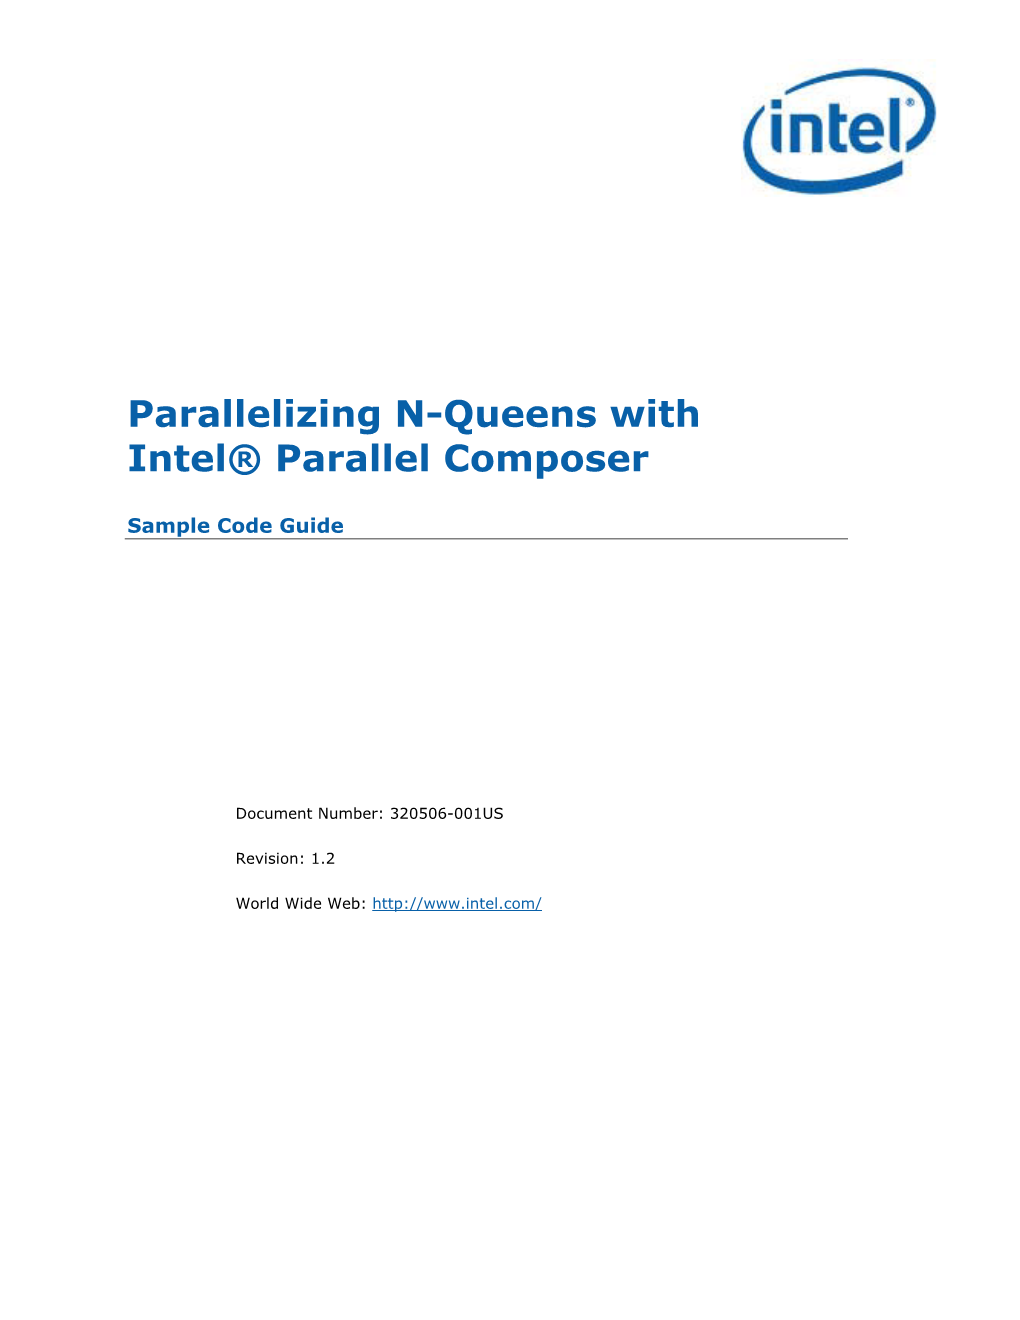 Parallelizing N-Queens with the Intel® Parallel Composer